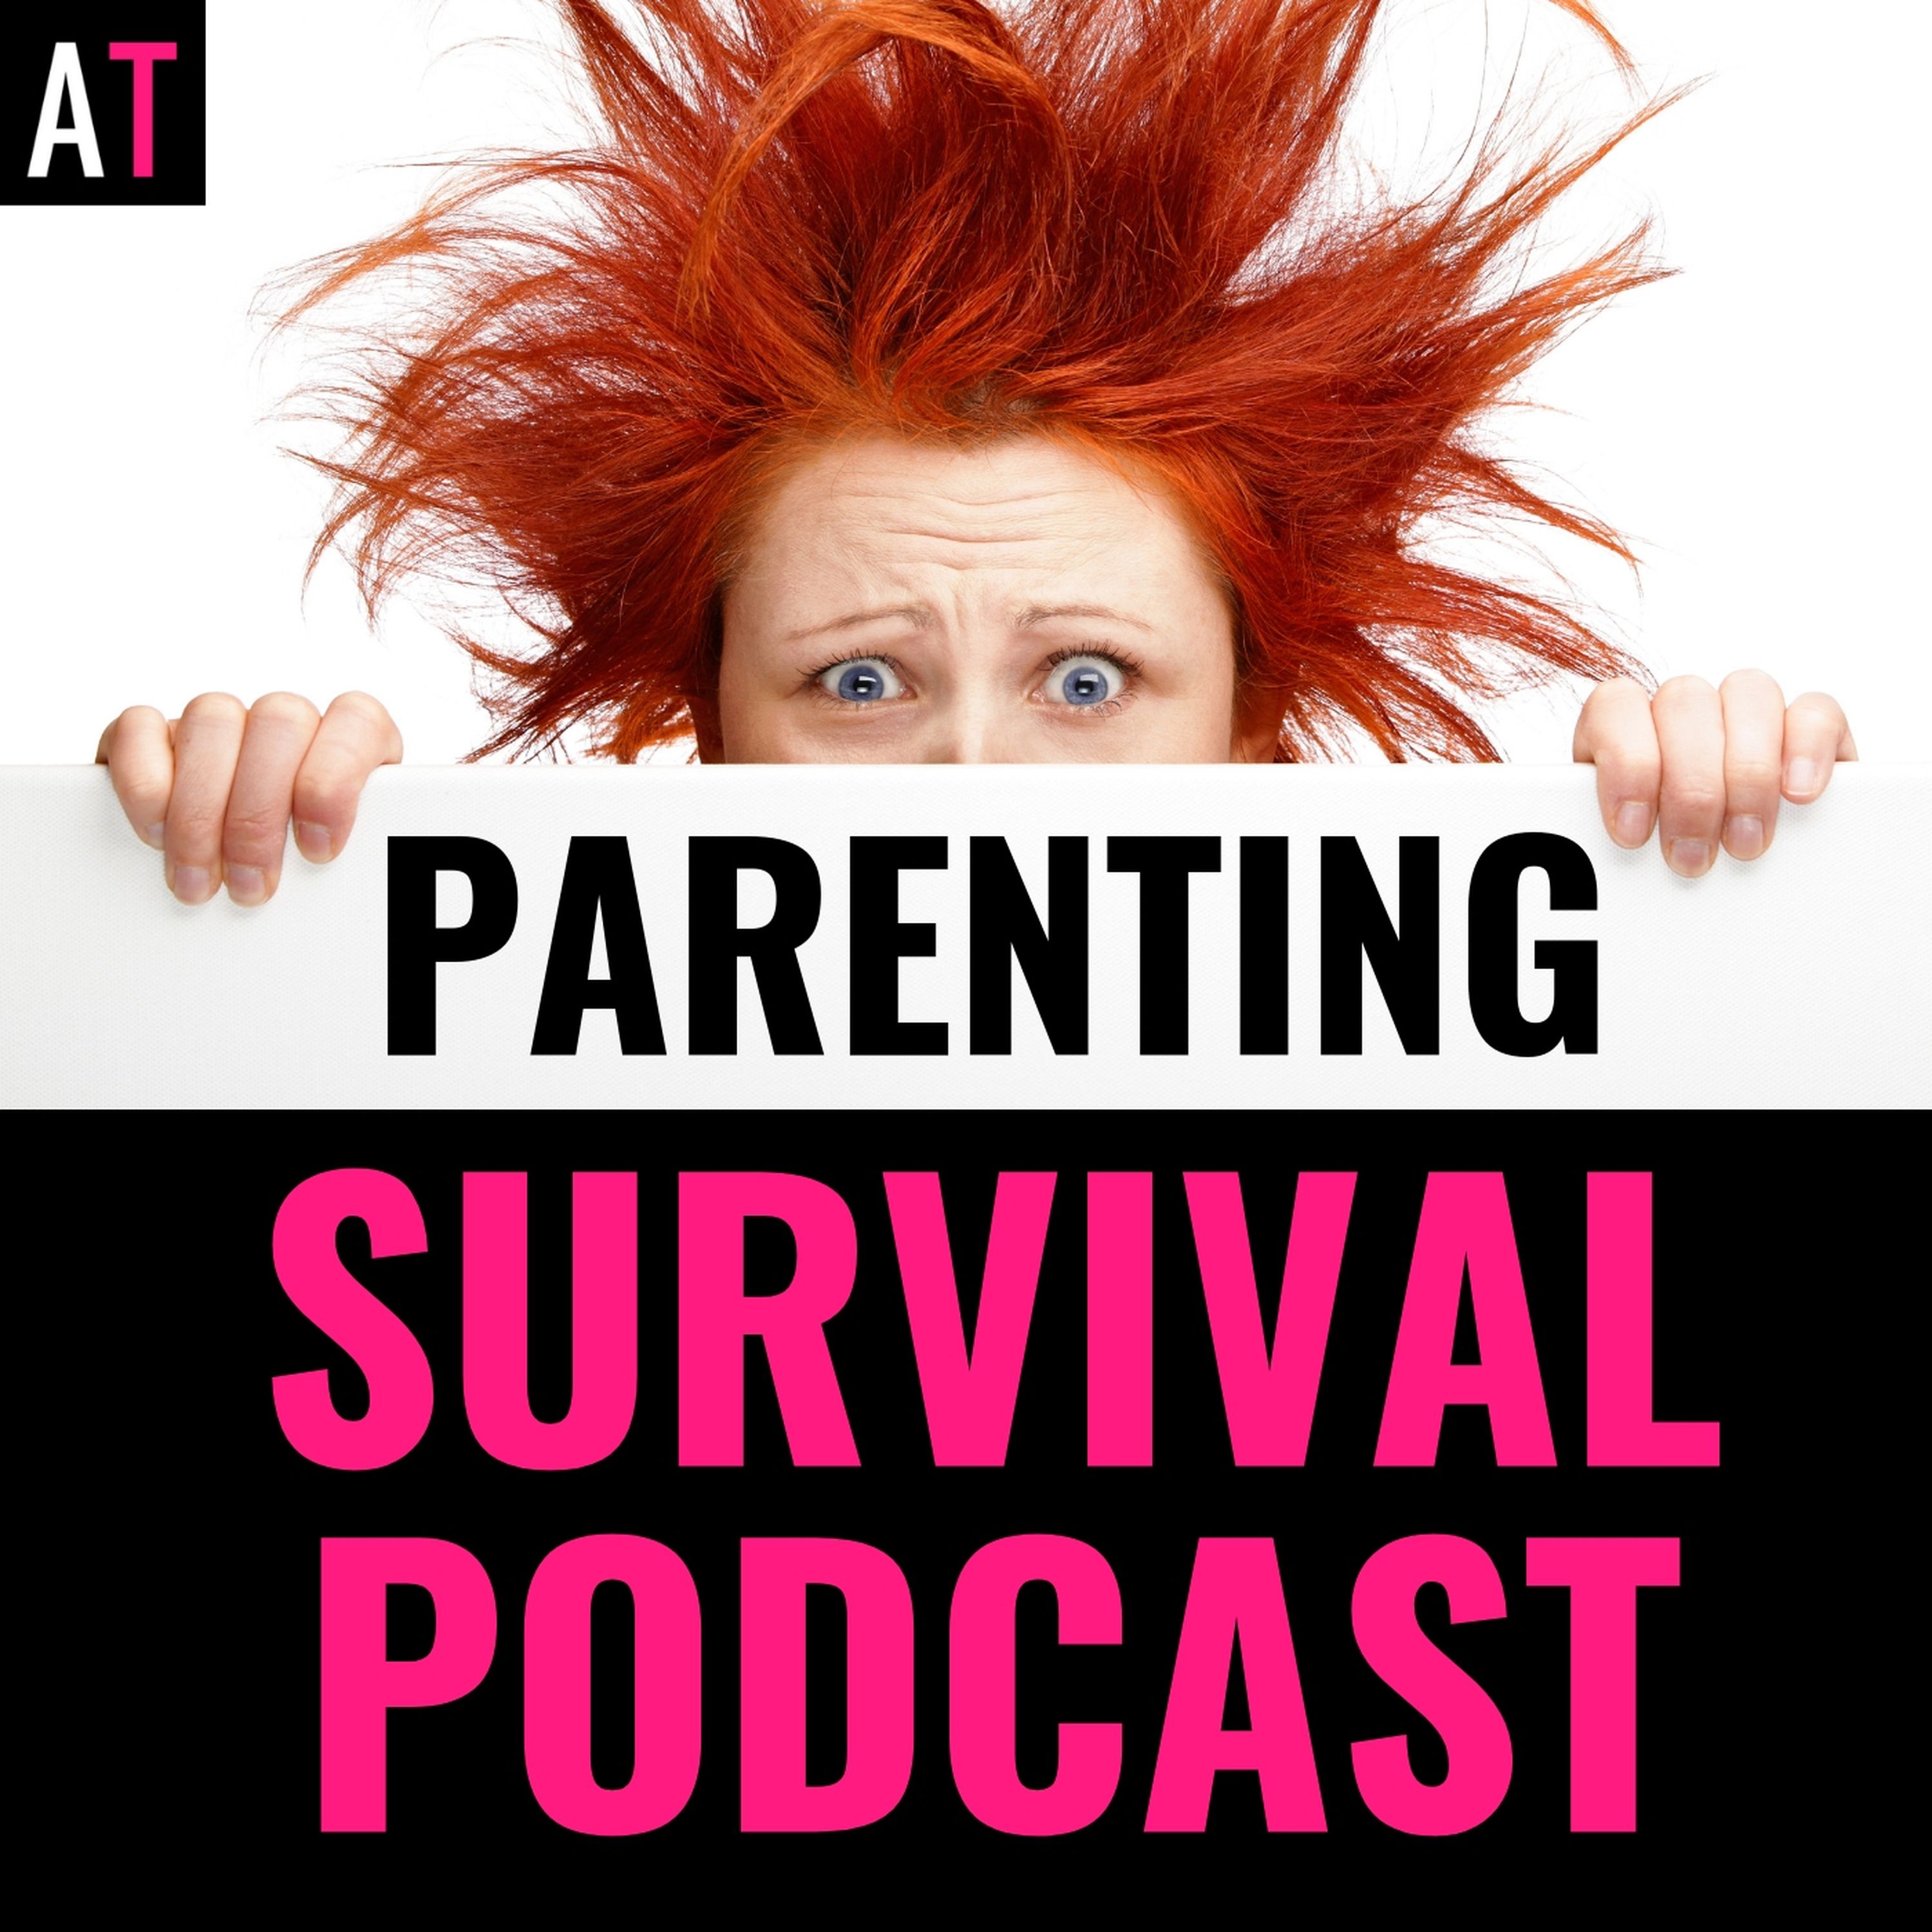 PSP 147: Do You Worry if Your Child’s Progress Will Last with their Anxiety or OCD?